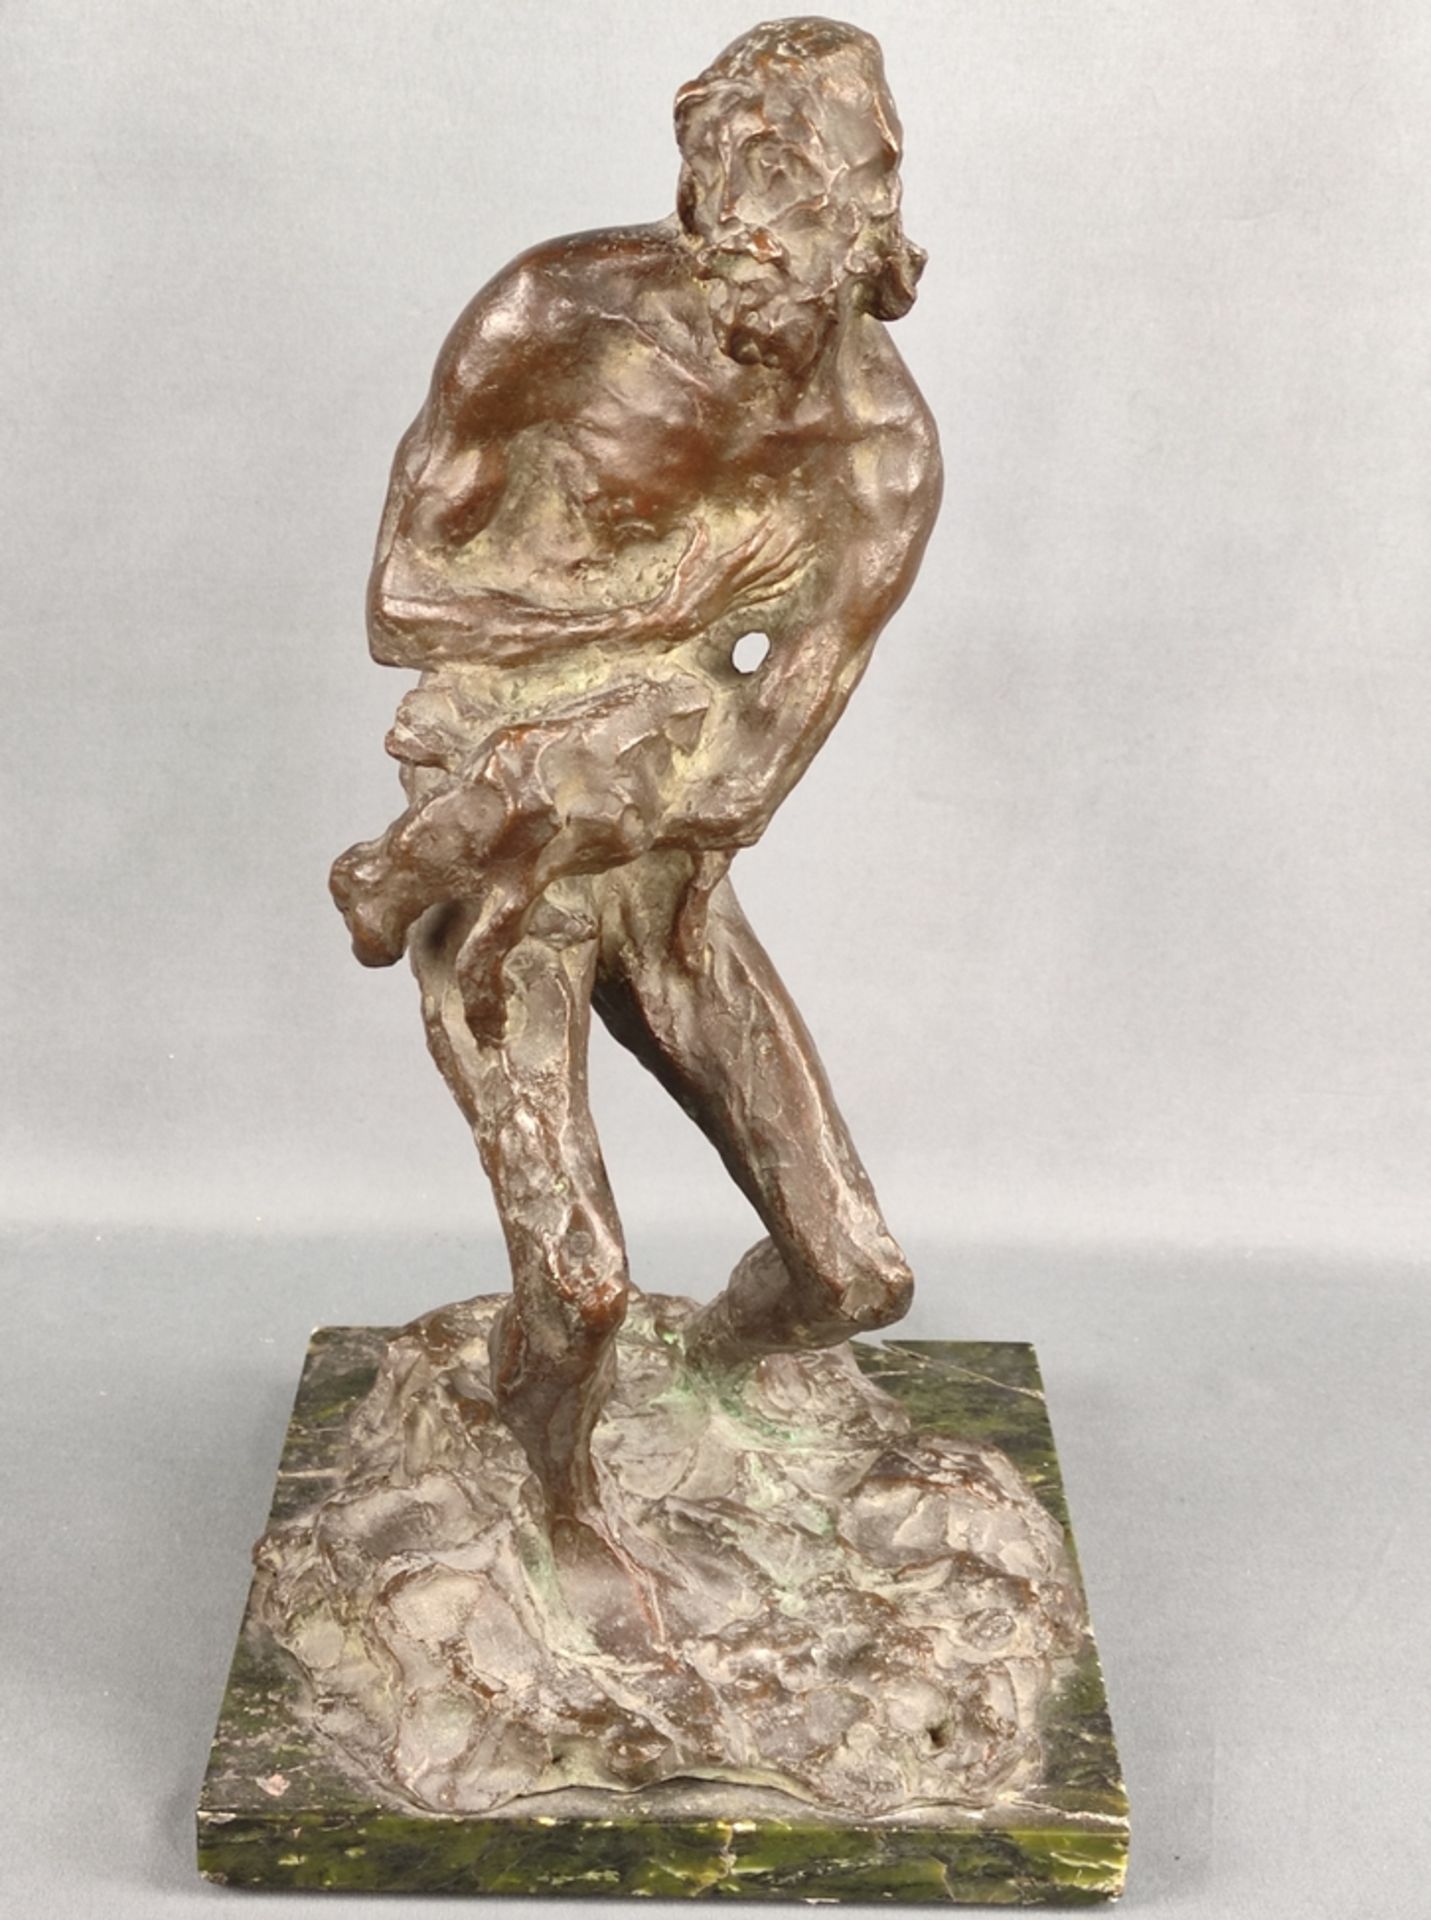 Pancera, Enrico (1882- 1971 Milan), attributed, "Compassion", bronze figure of a man standing uprig